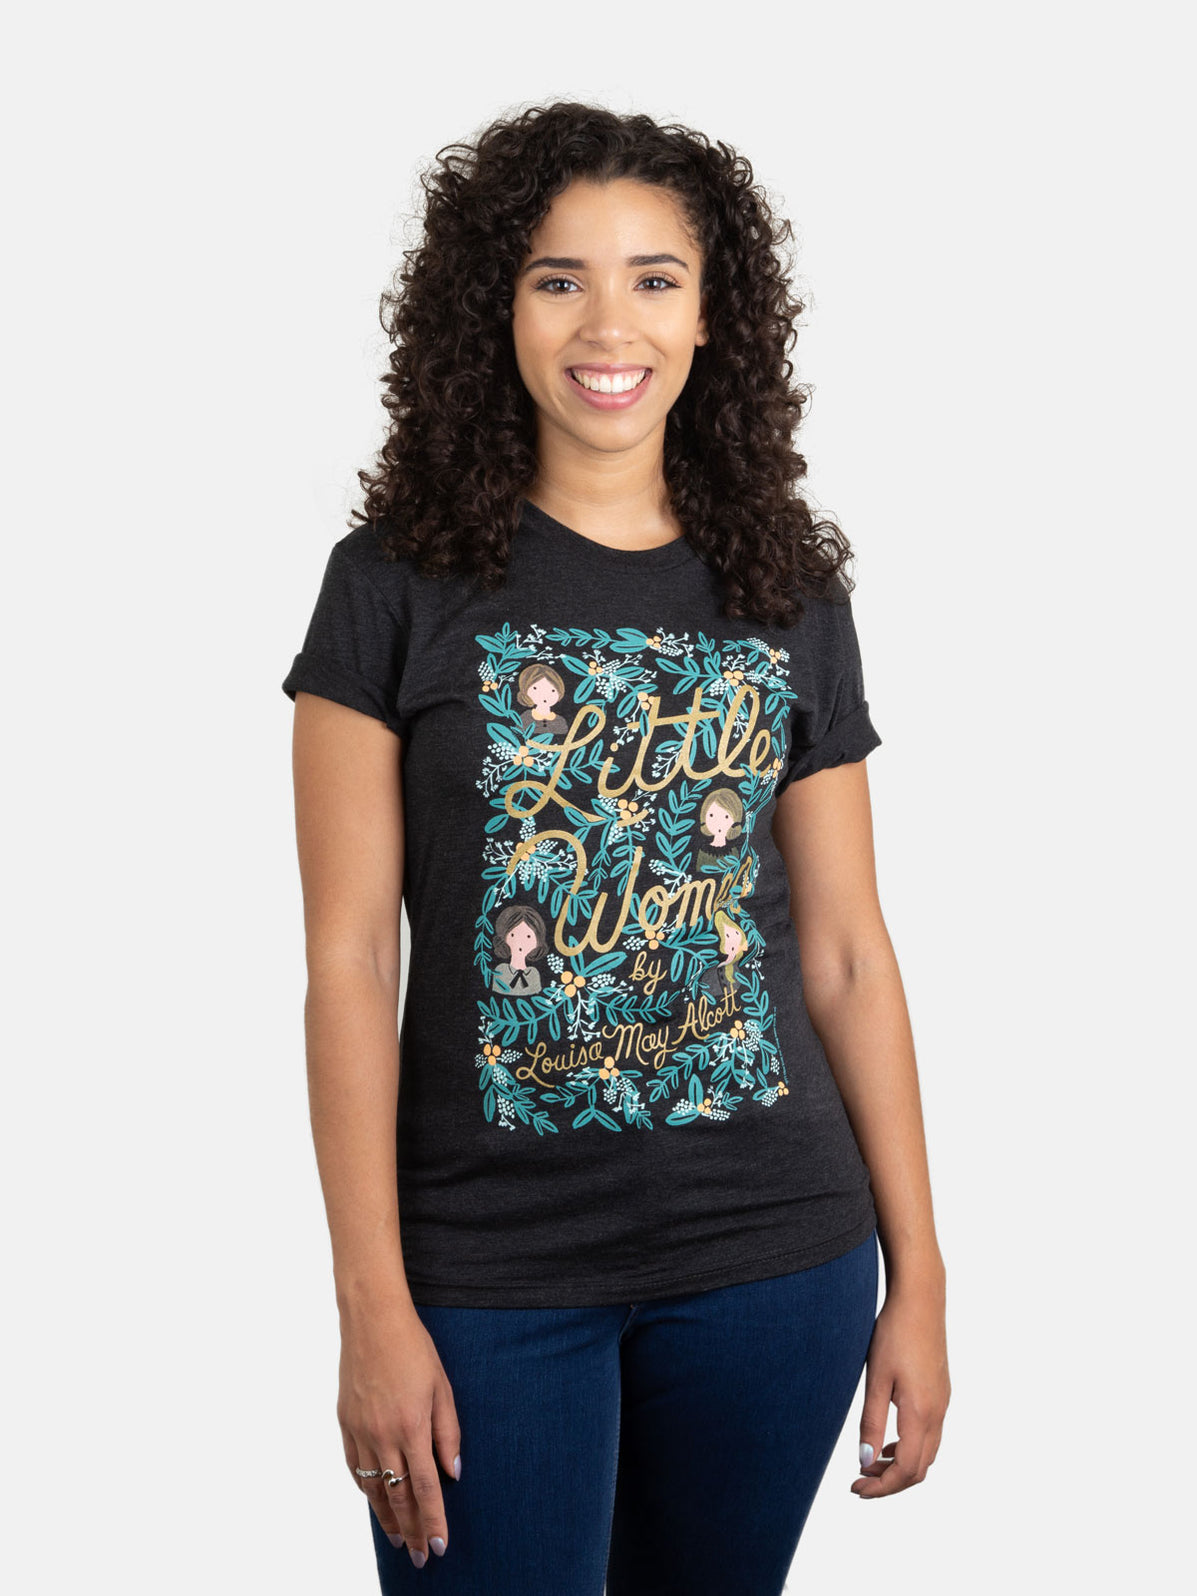 Little Women - Puffin in Bloom unisex book t-shirt — Out of Print